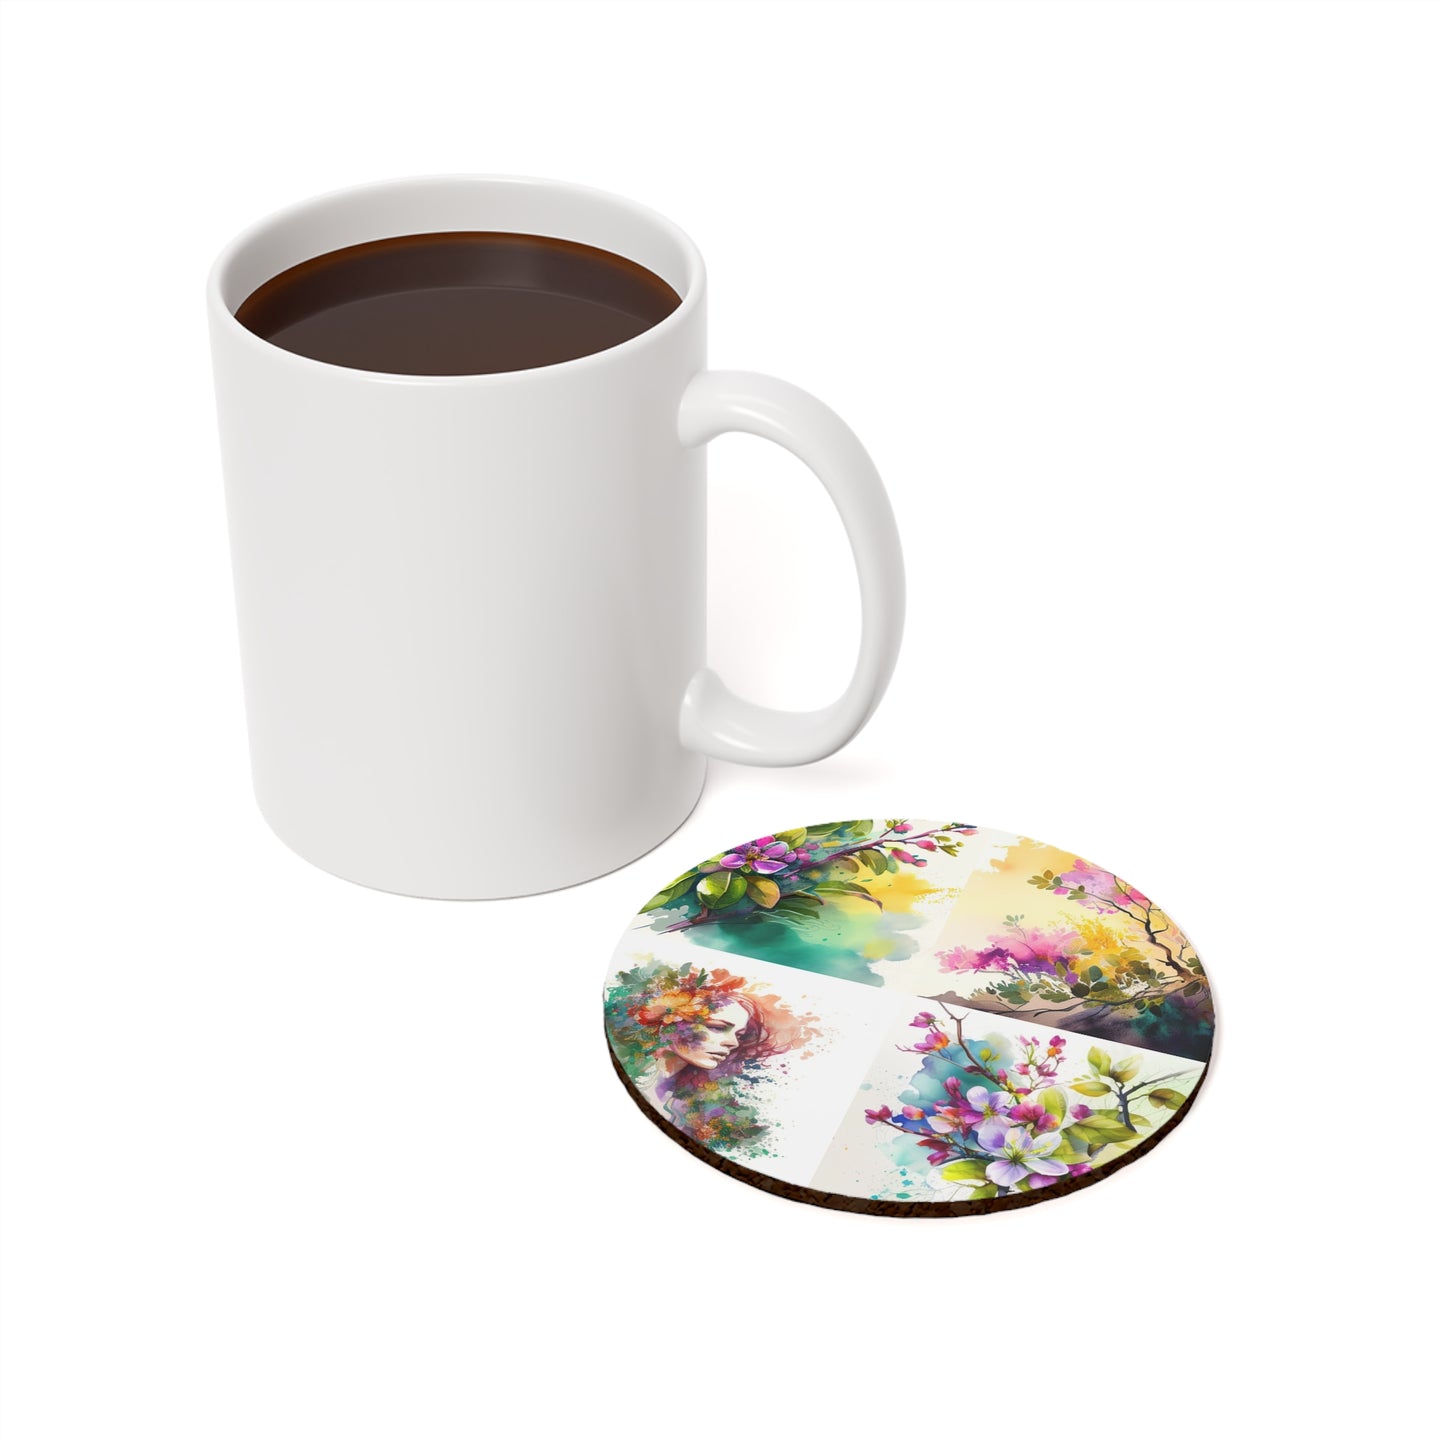 Cork Back Coaster Mother Nature Bright Spring Colors Realistic Watercolor 5